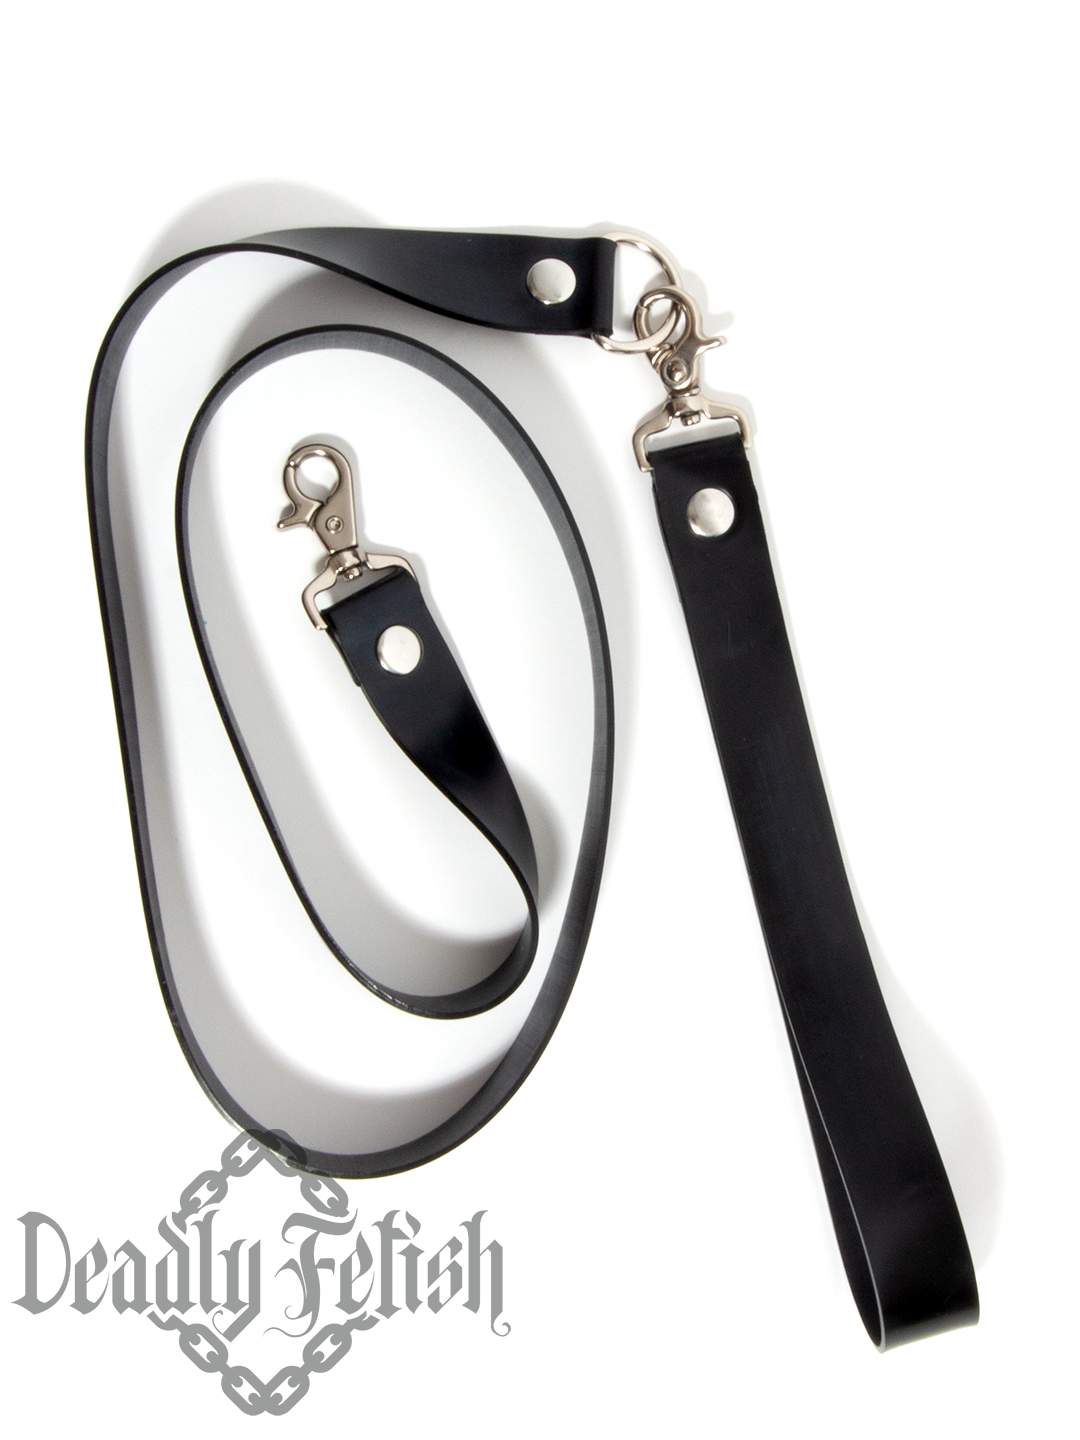 Deadly Fetish Made-To-Order Latex: Latex Leash